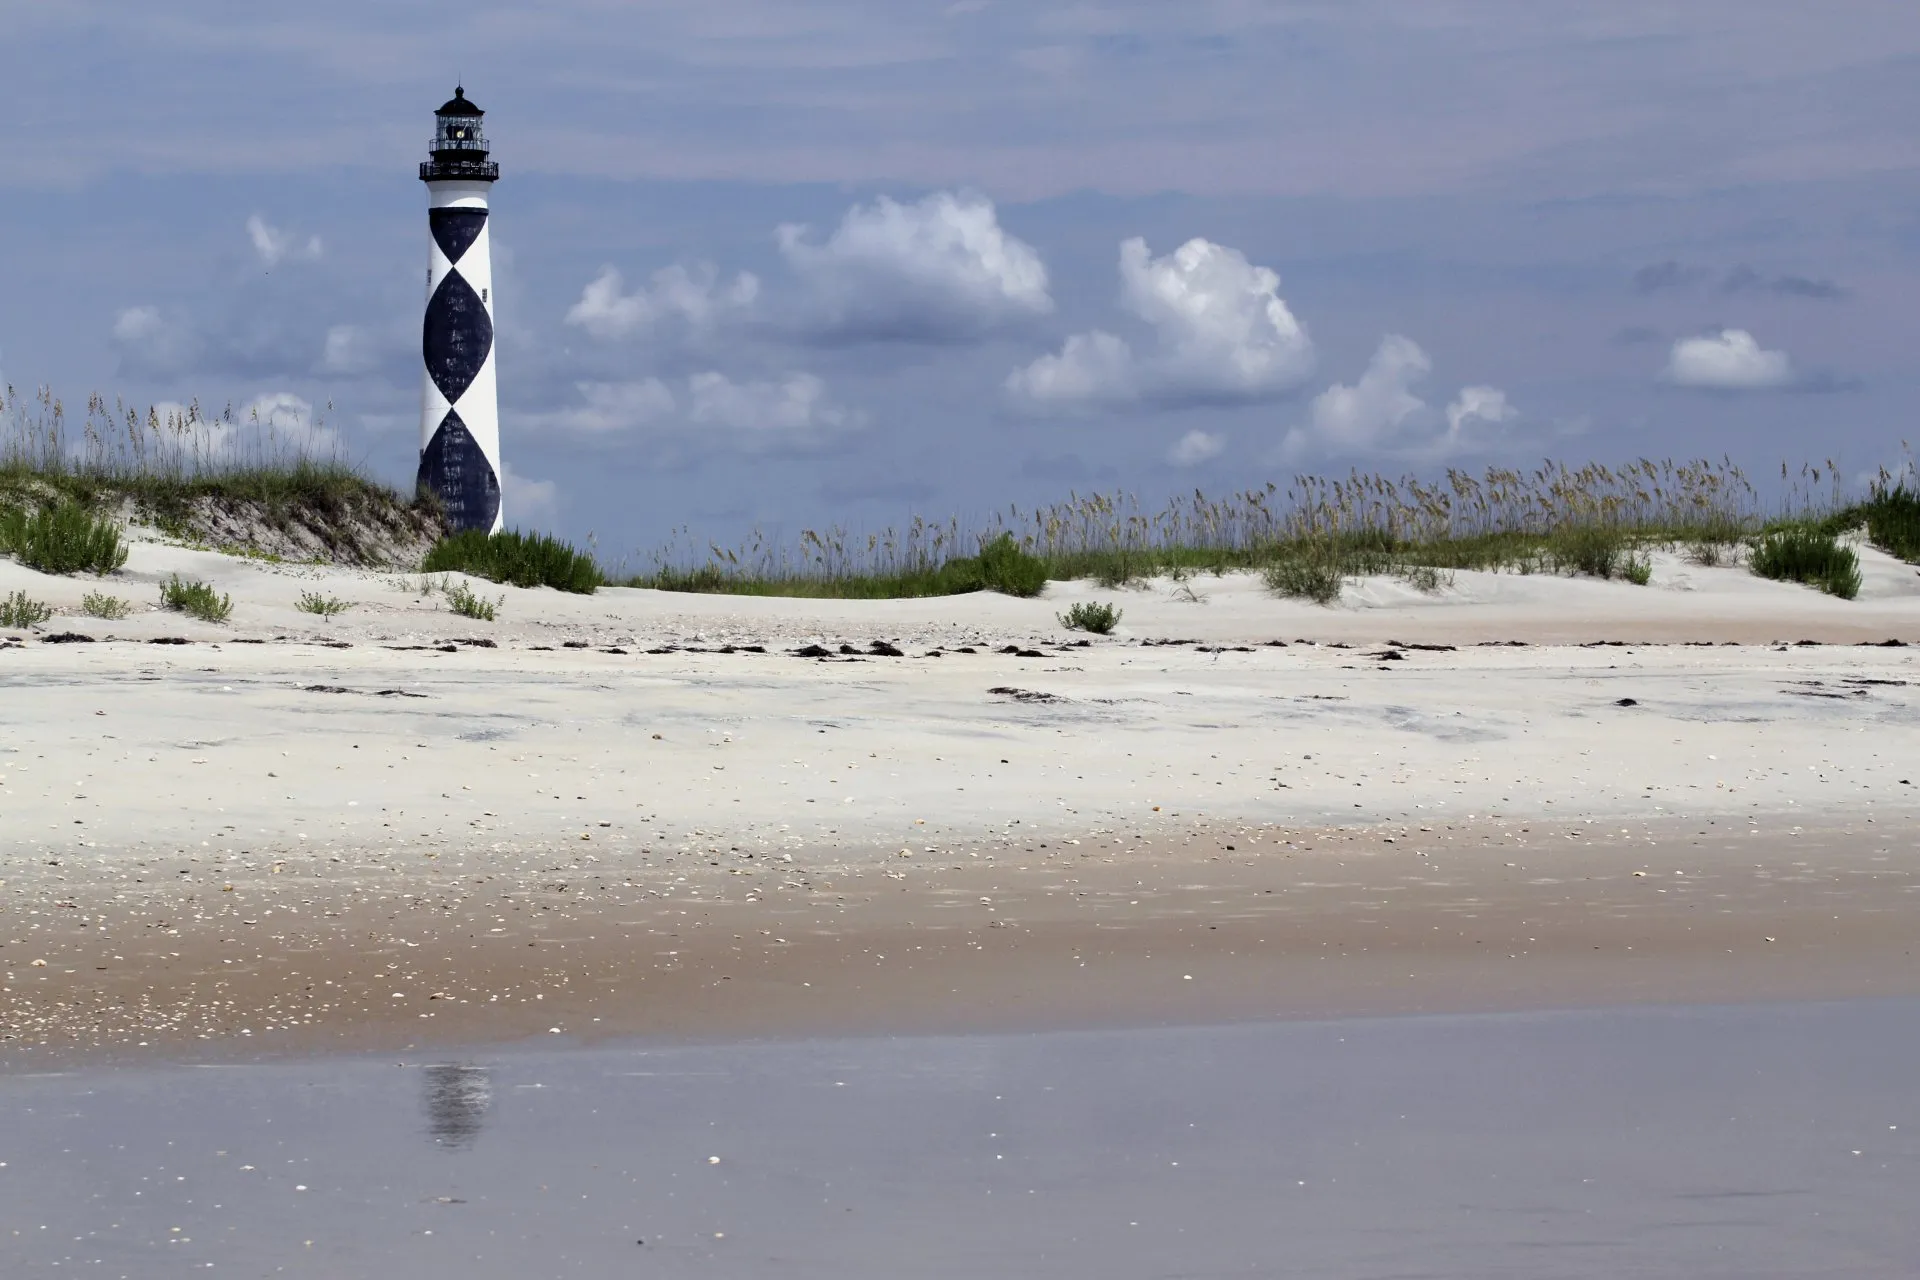 A wide view of a lighthouse by the shore